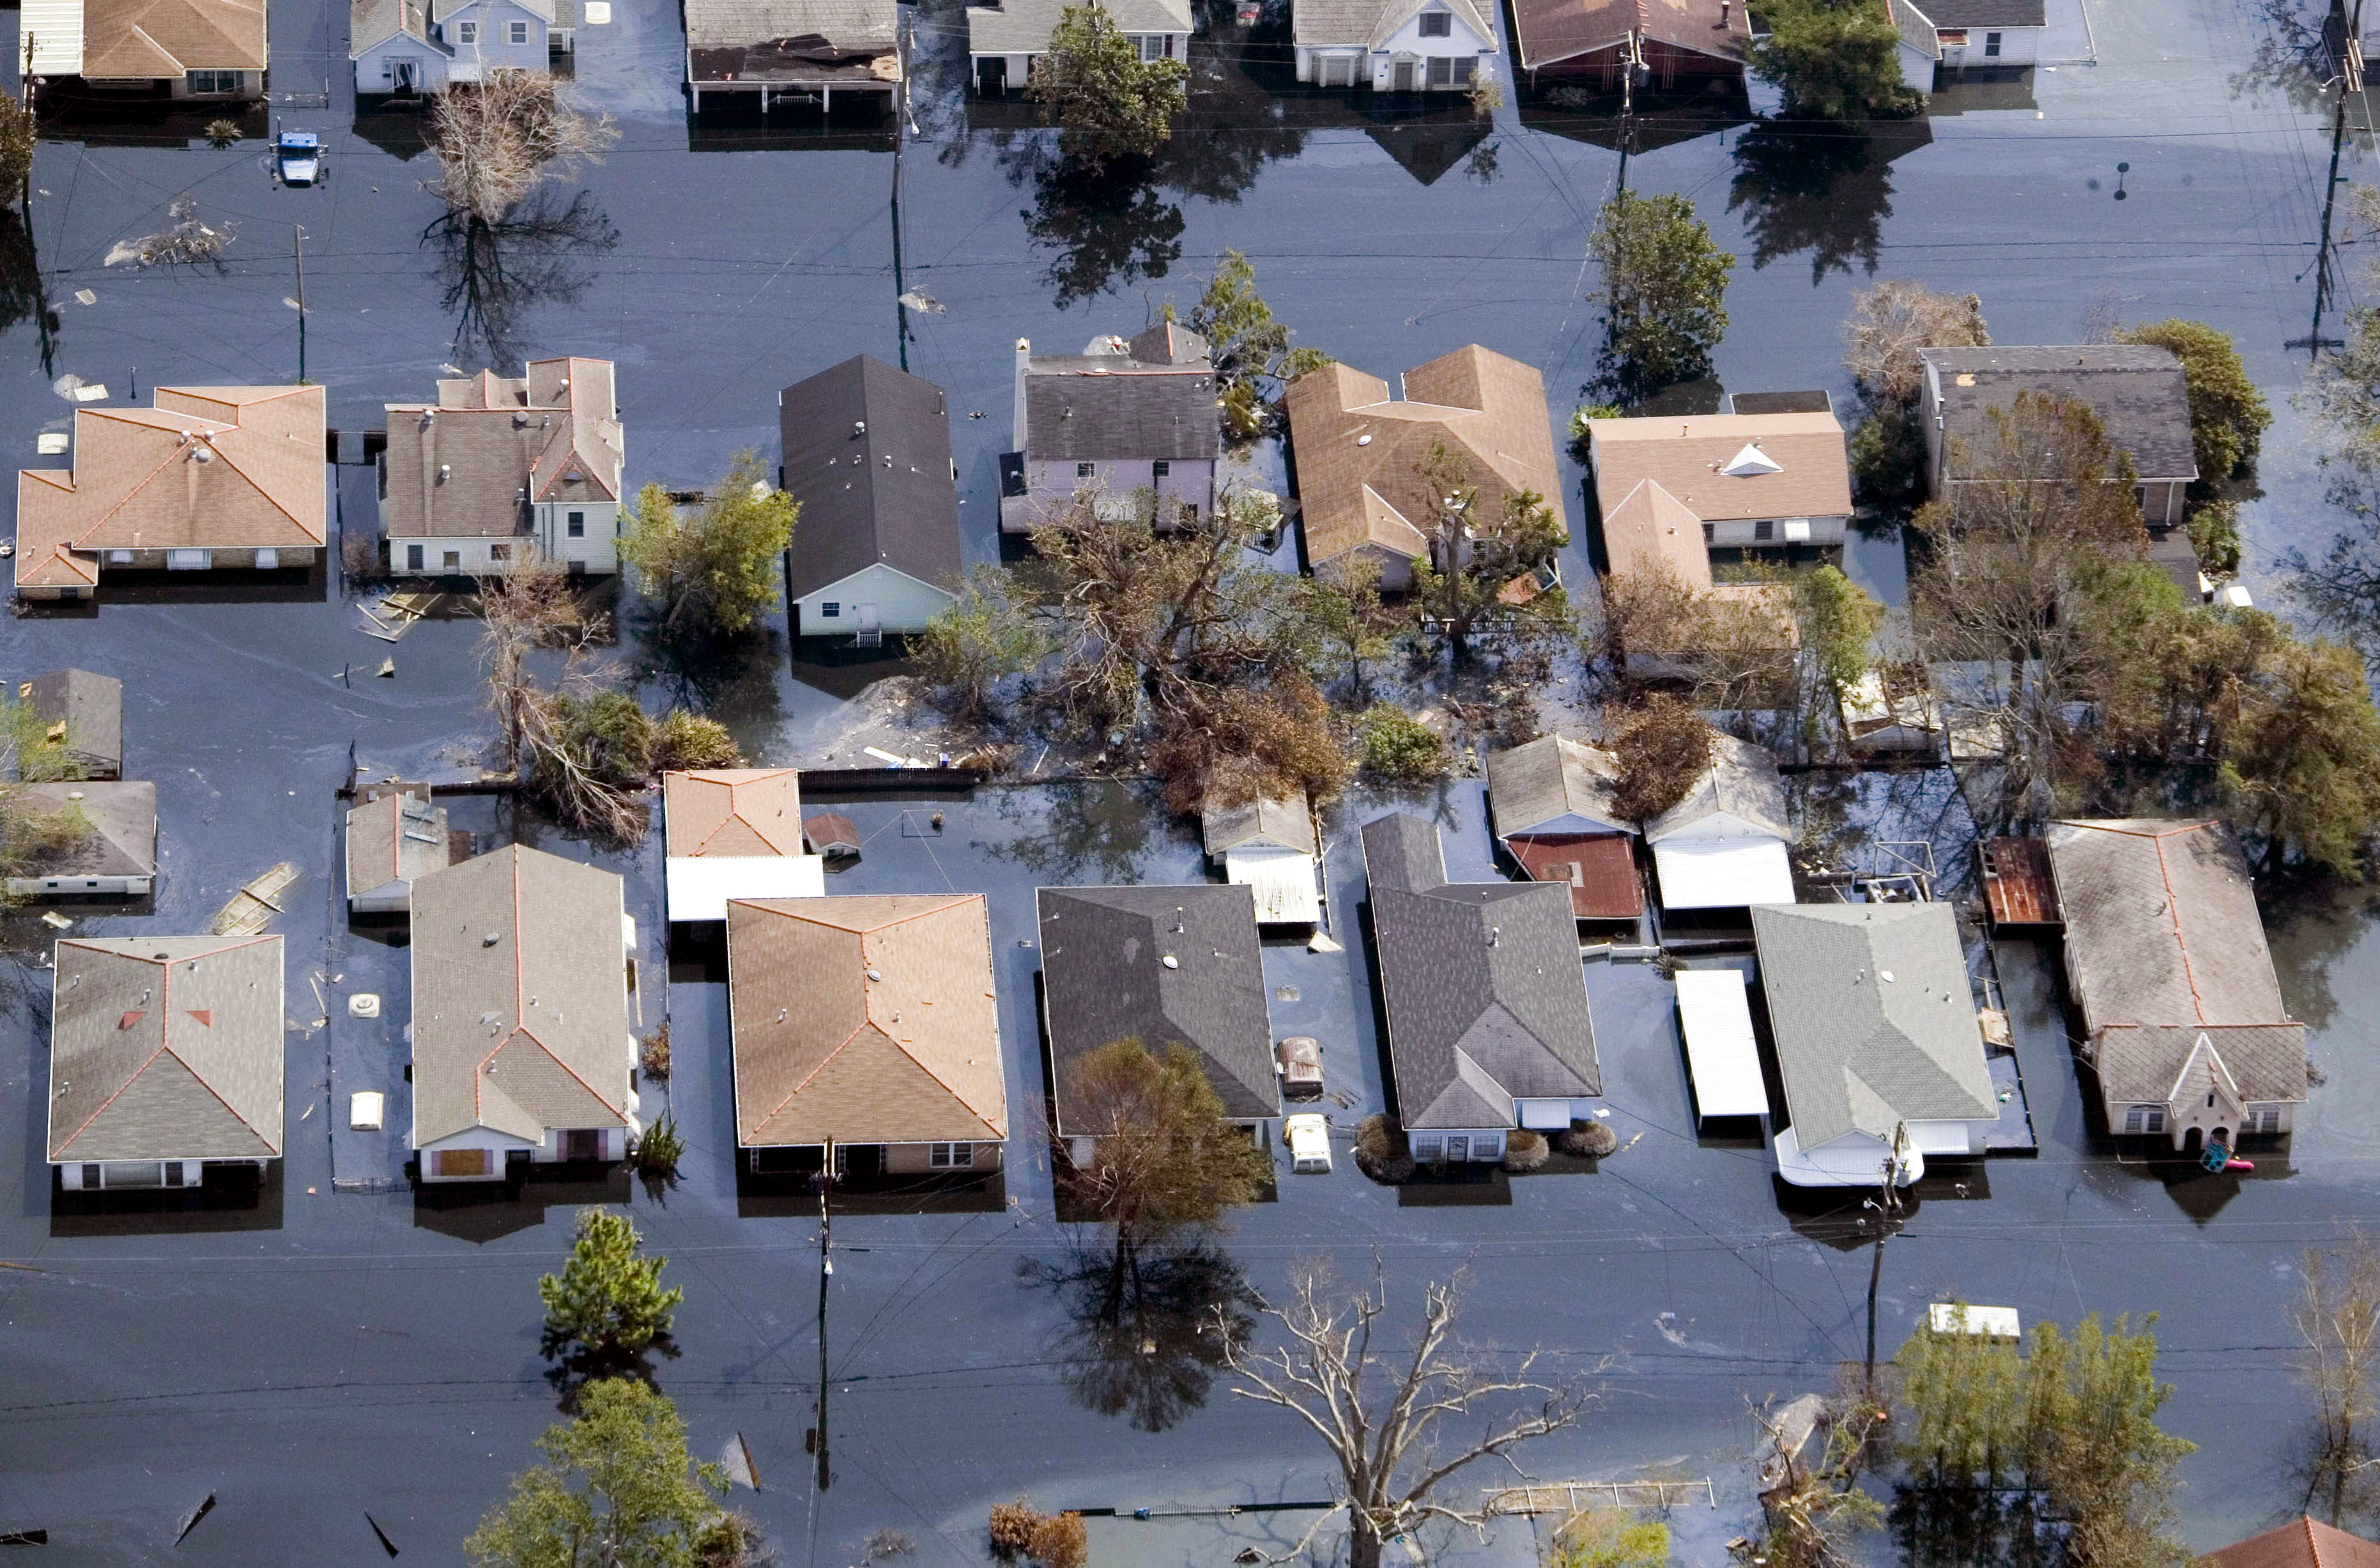 Houses lie flooded from Hurricane Katrina in the Gentilly neighborhood of New Orleans, Louisiana on Sept. 11, 2005. (Jerry Grayson—Getty Images)